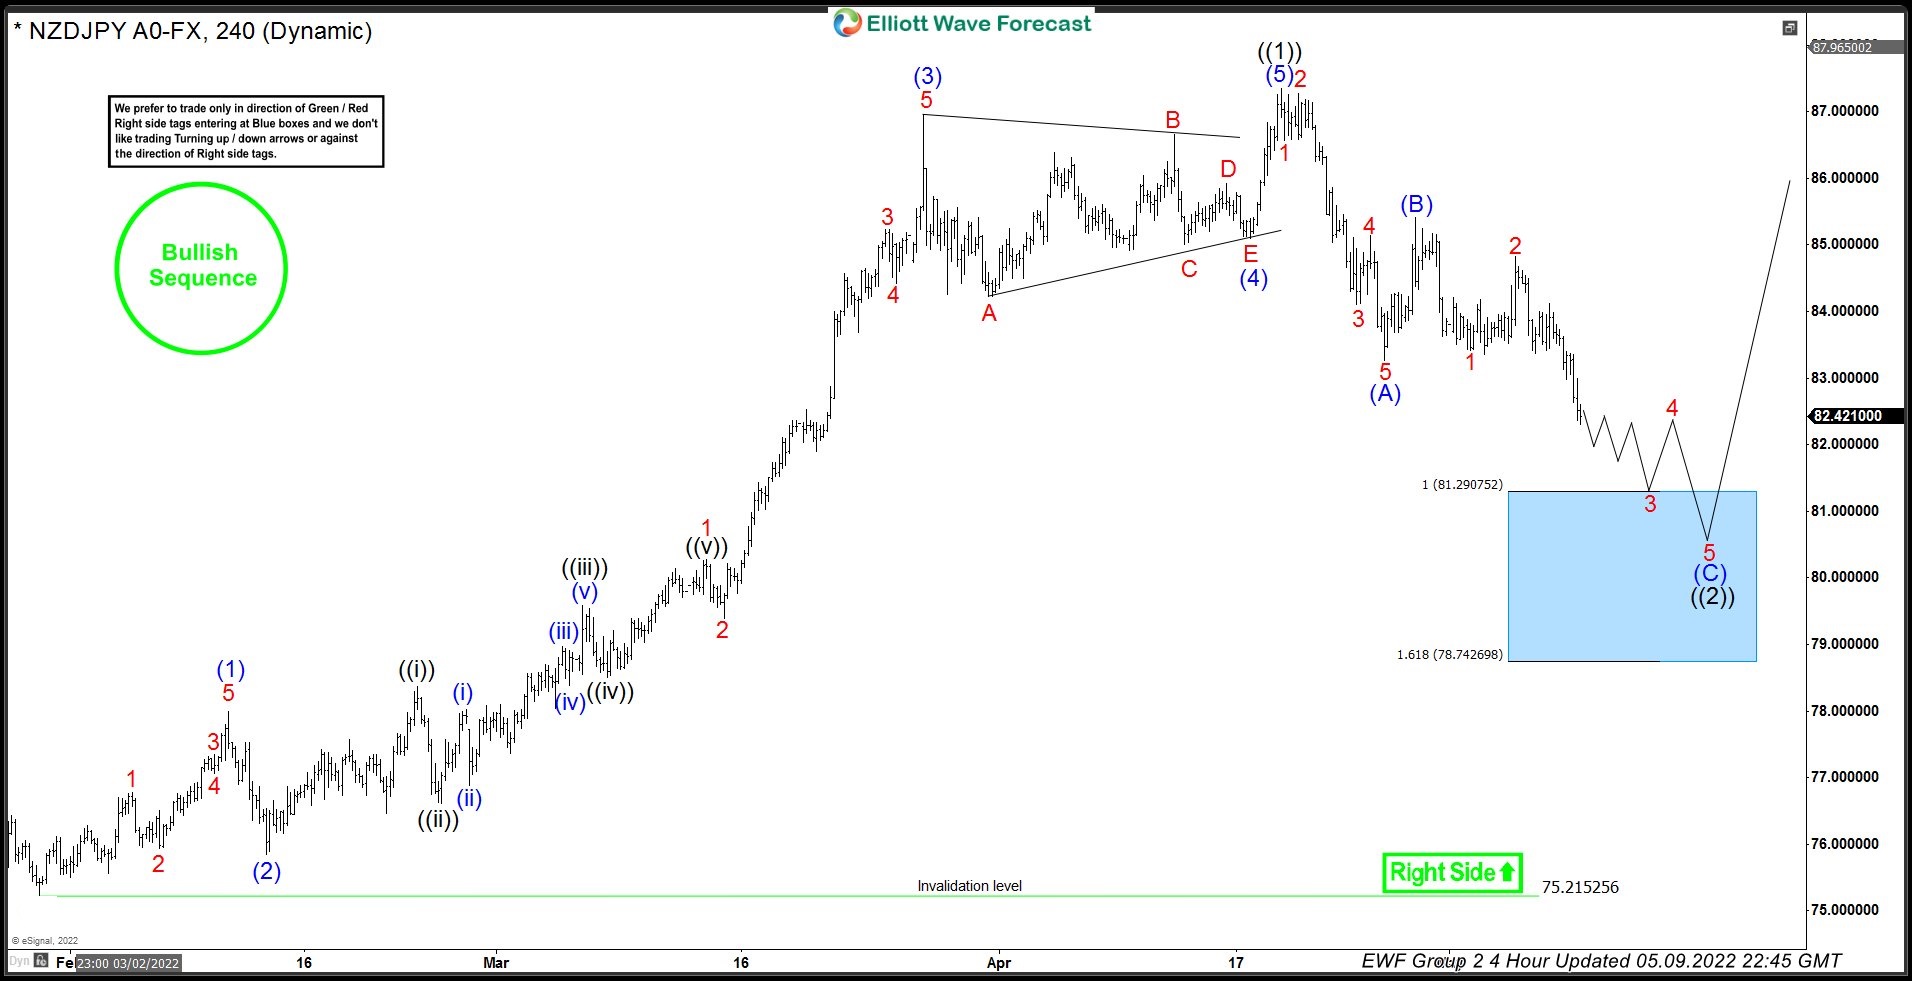 NZDJPY Buying The Dip After Elliott Wave Zigzag Correction